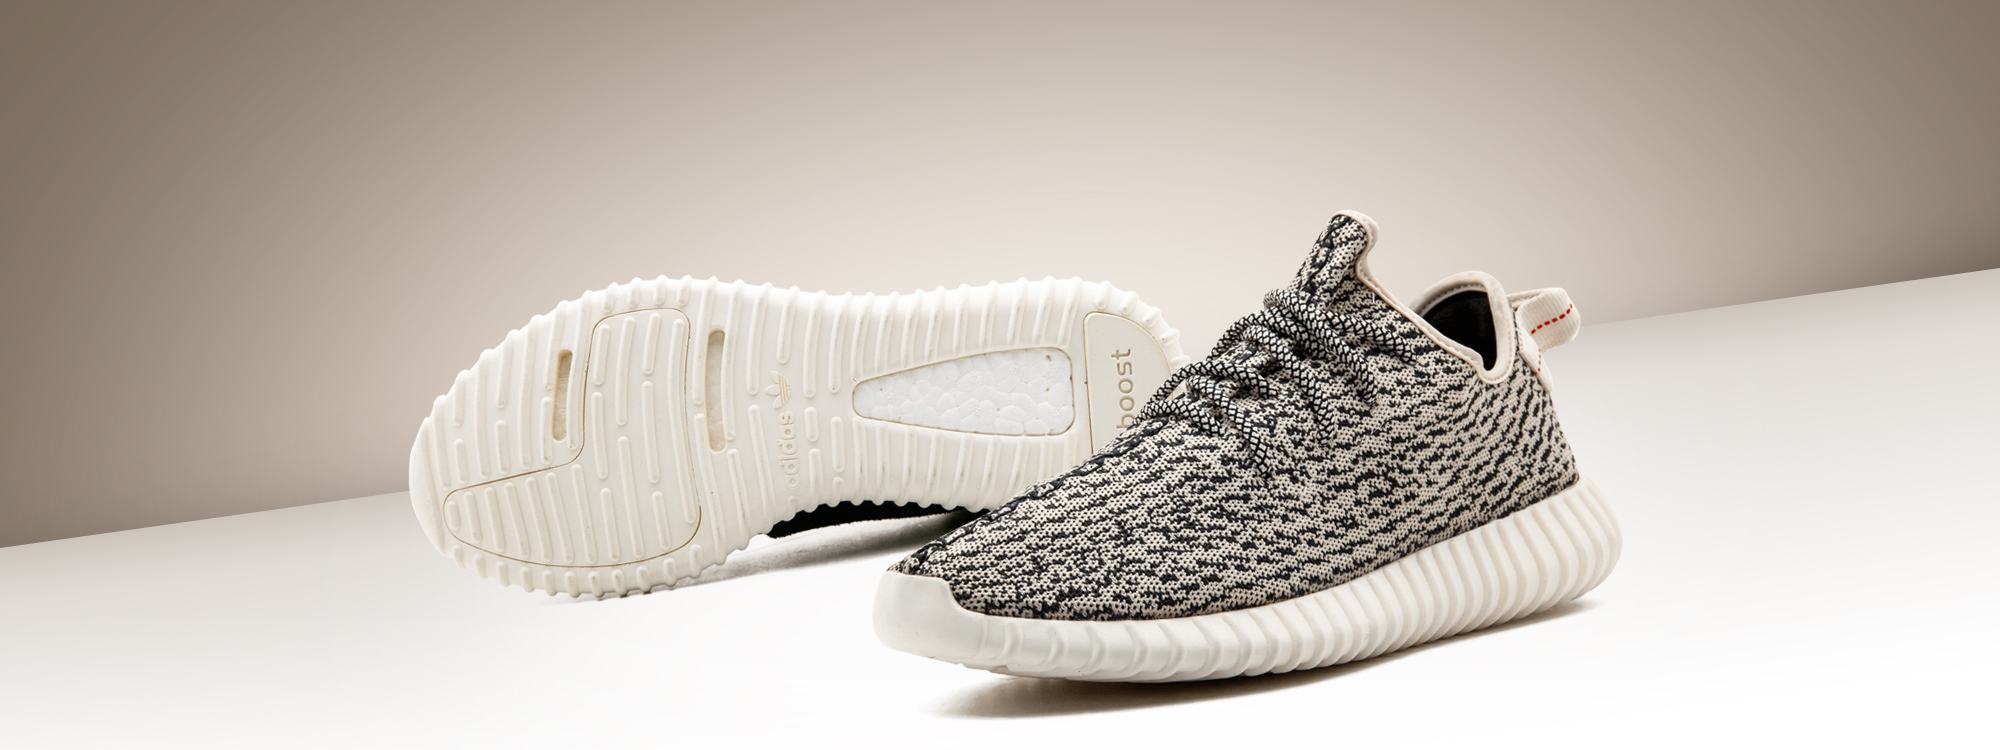  Yeezy Boost  350 Turtle Dove kids outfit